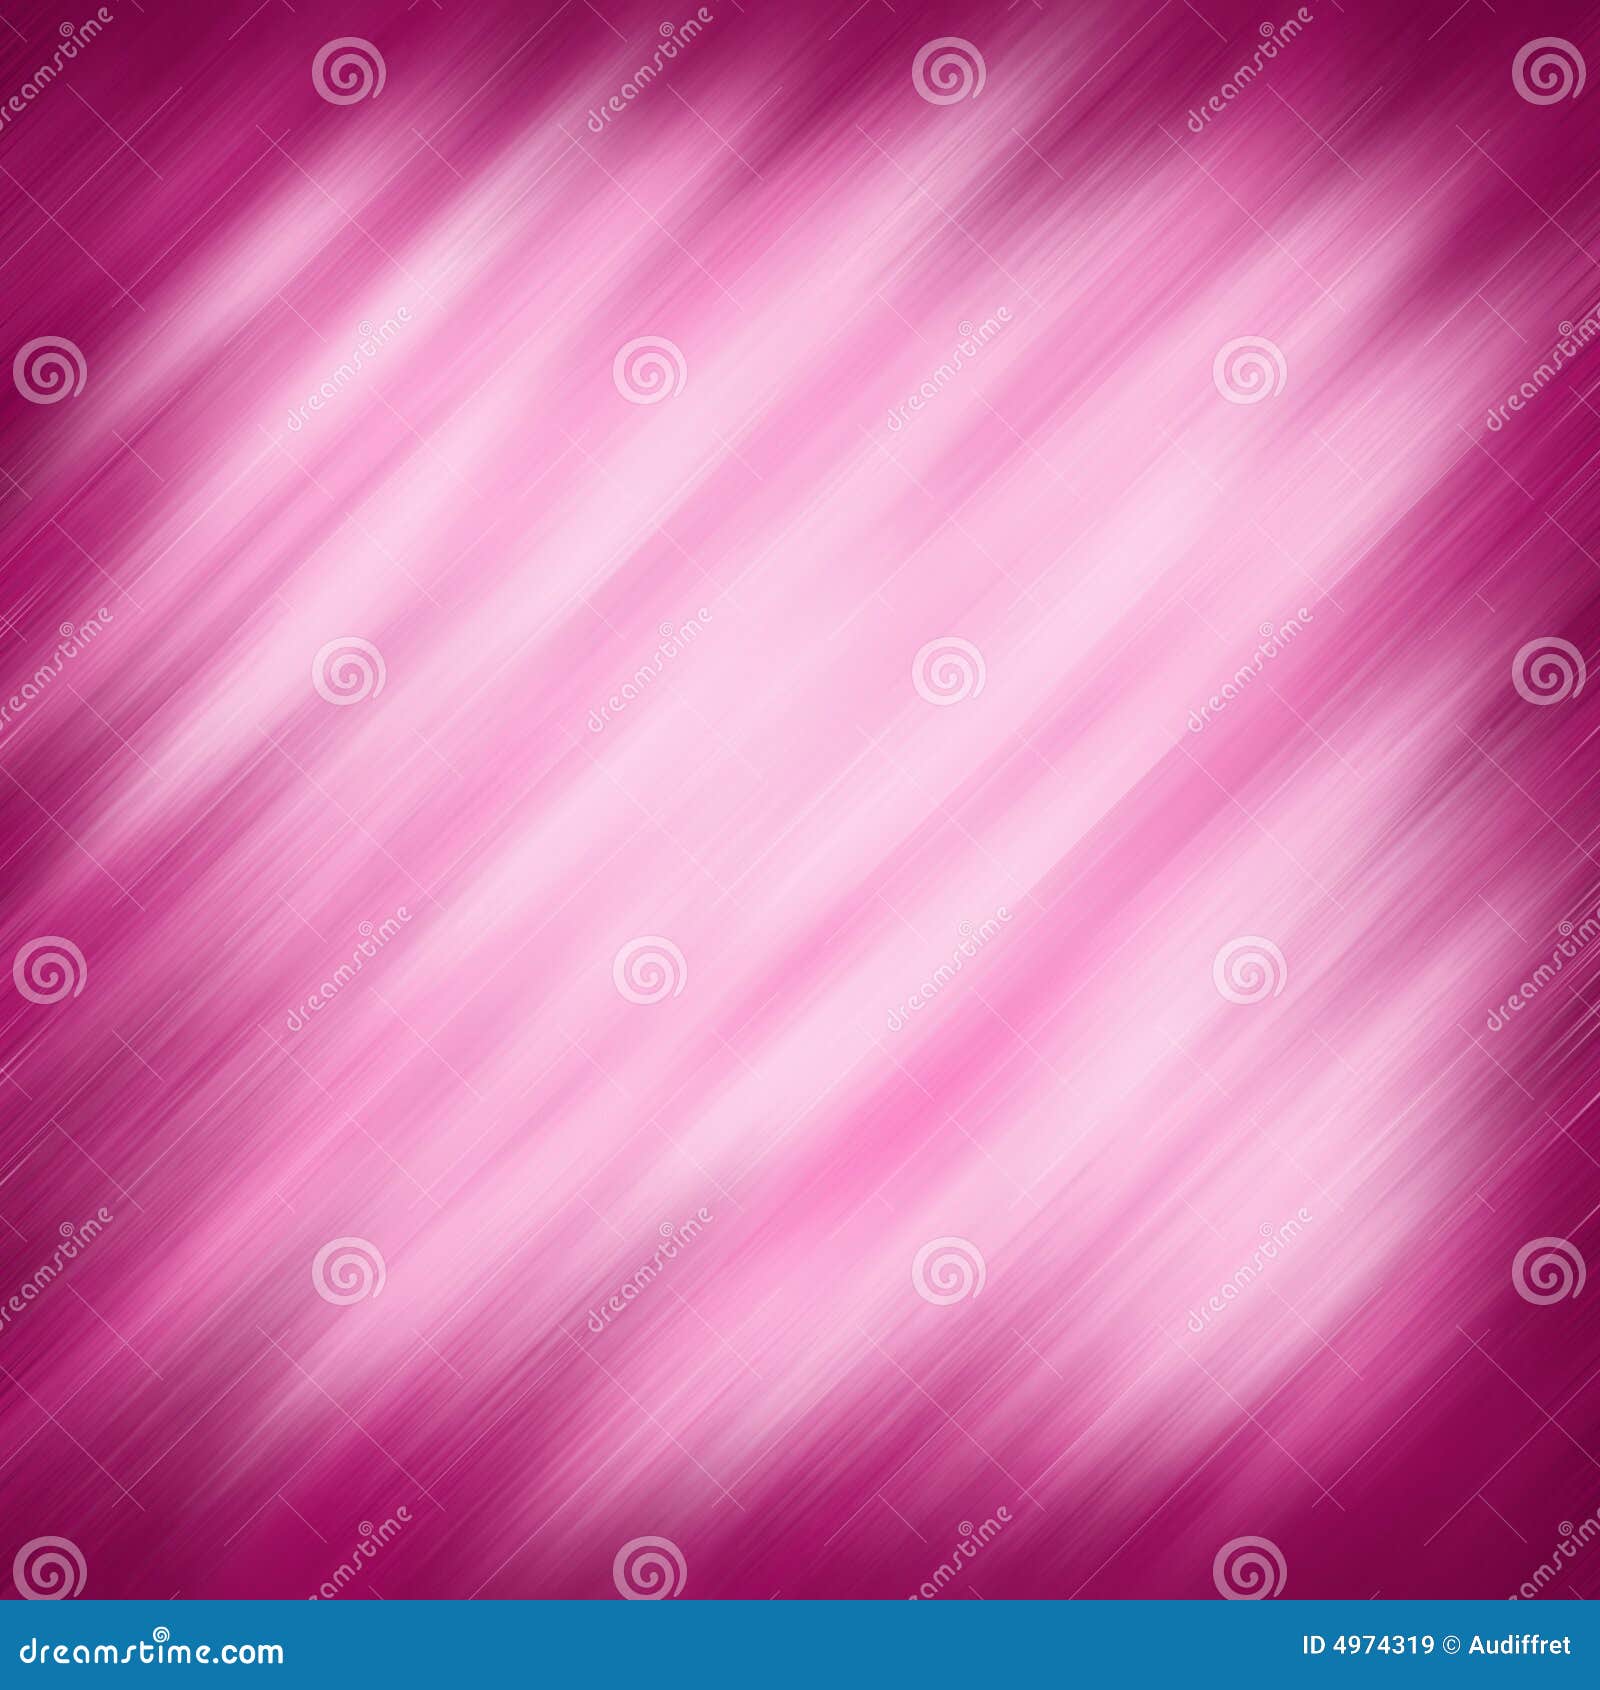 Red and pink background stock illustration. Illustration of colour - 4974319